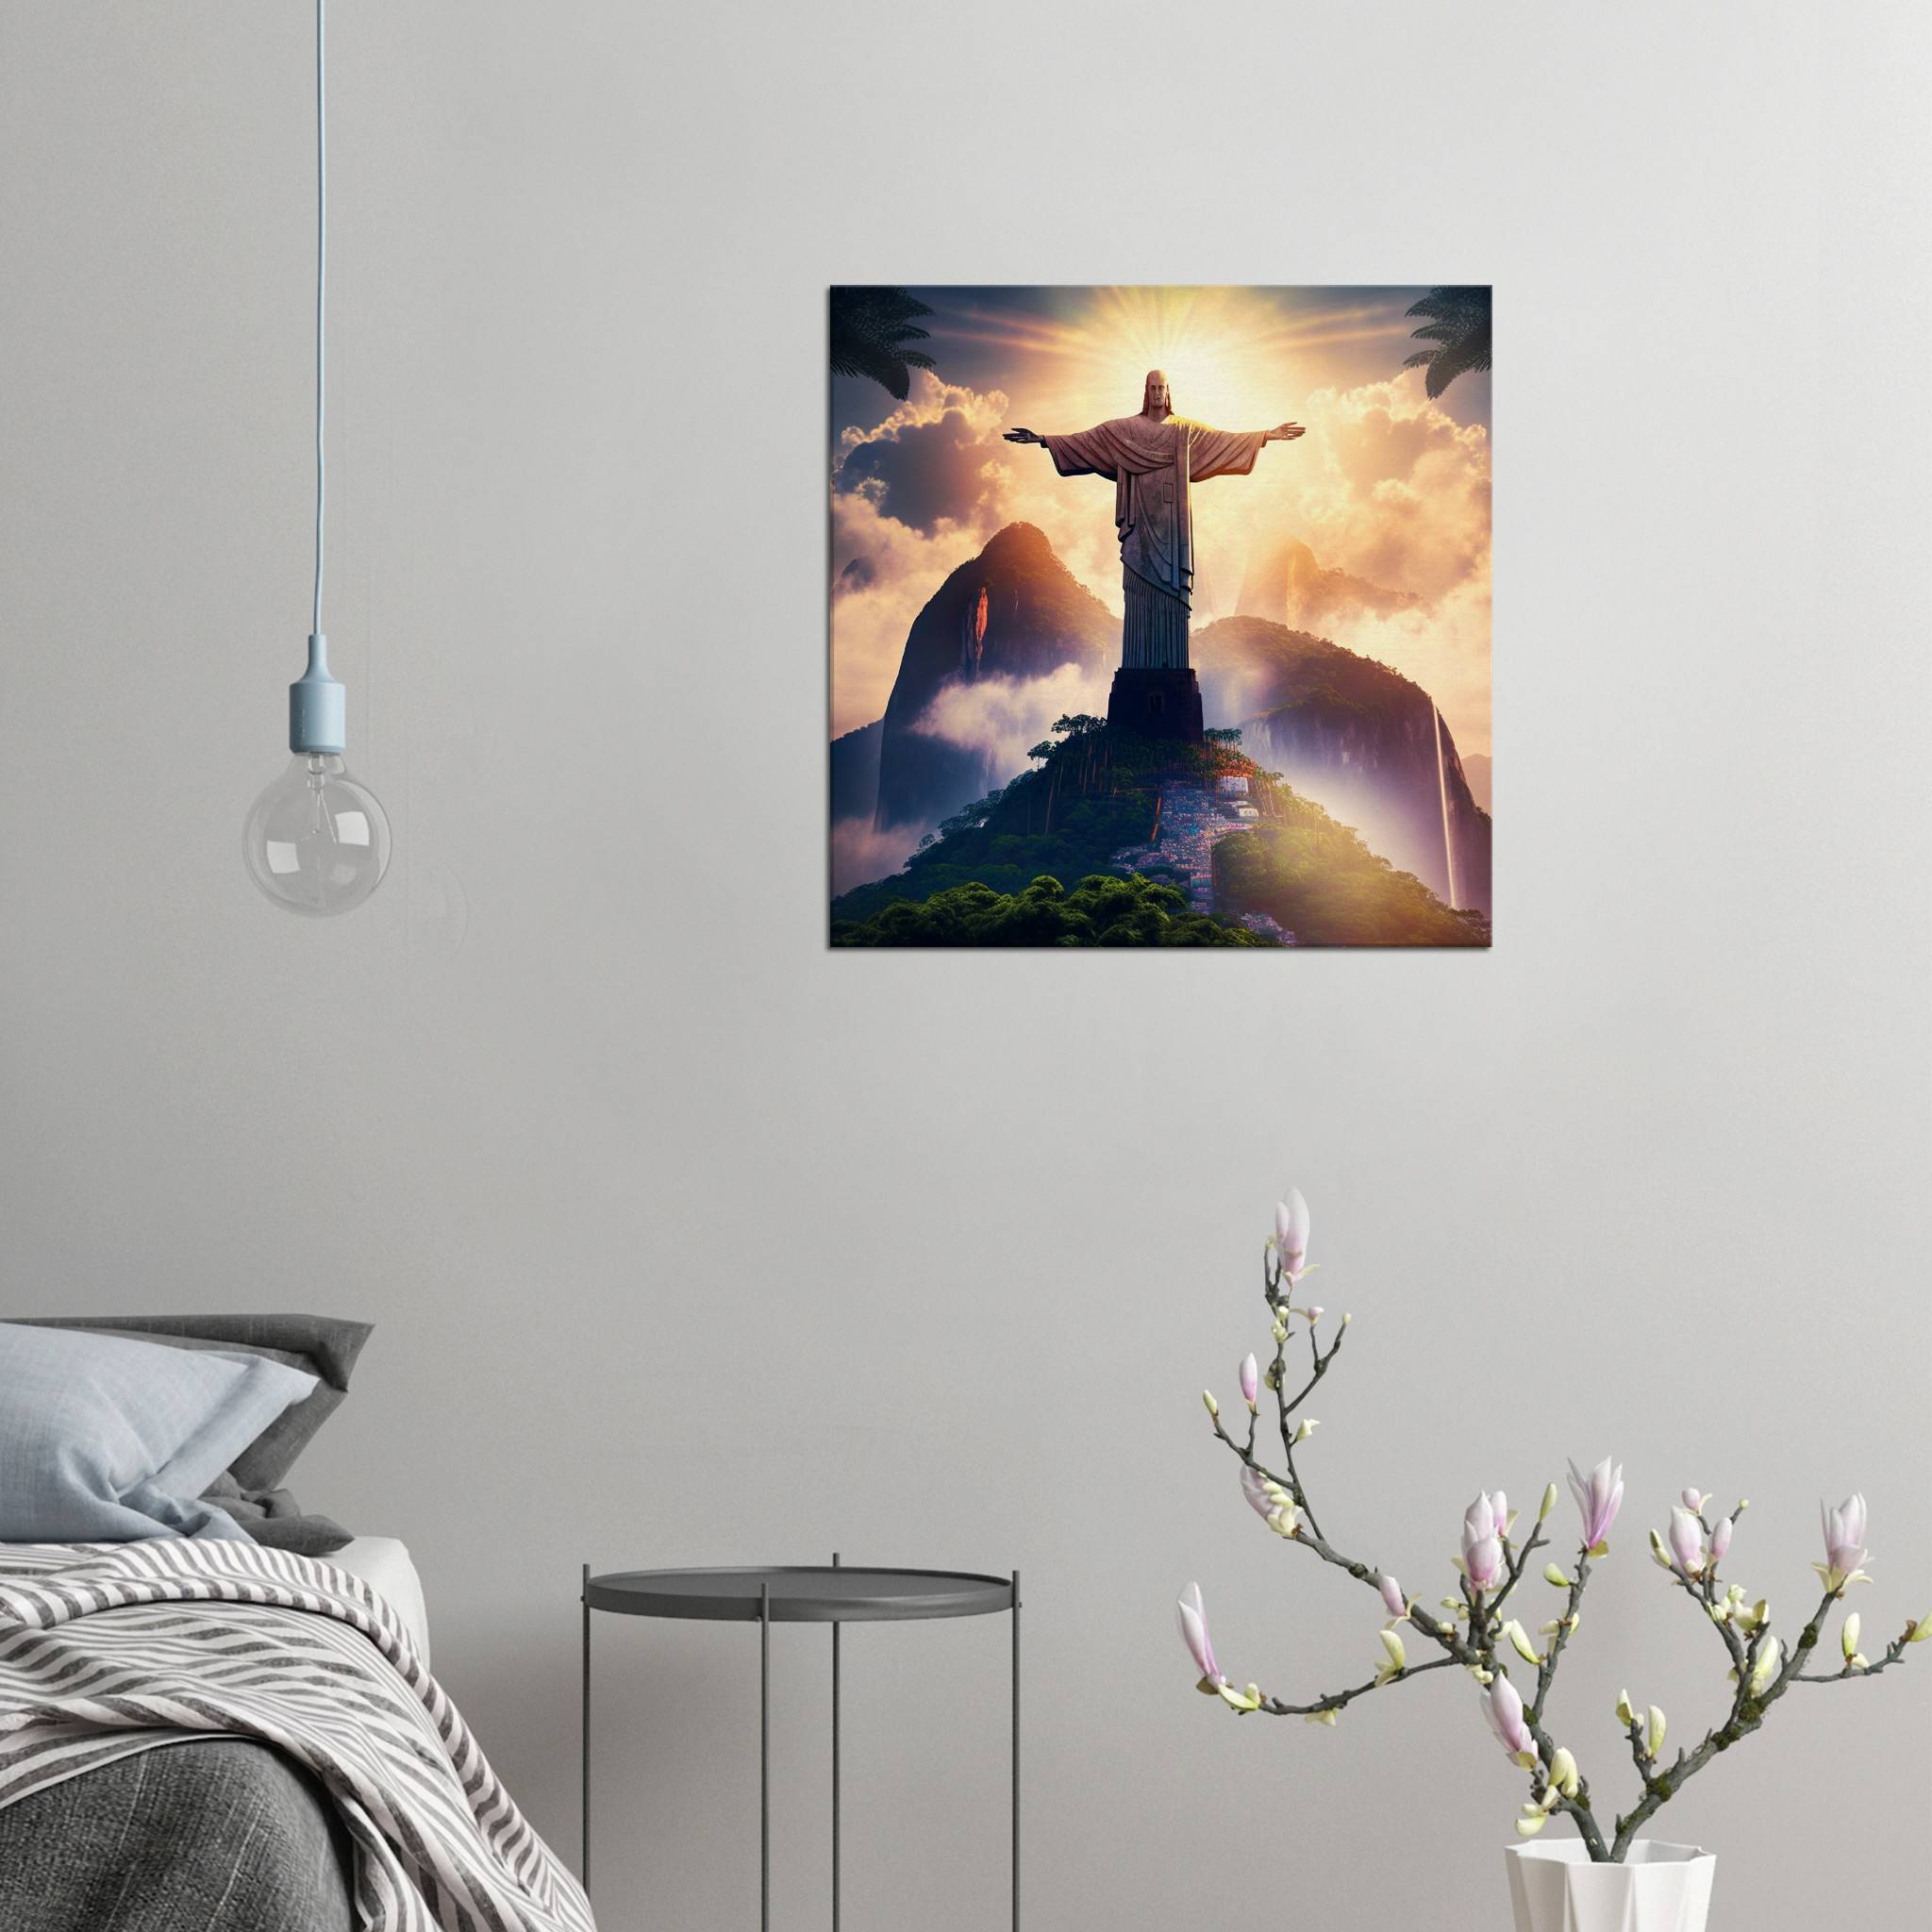 Christ the Redeemer 9 / 60 x 60cm (Canvas Print) Canvas Print Canvas reproduction The Pianist Print On Demand Fabled Gallery https://fabledgallery.art/product/christ-the-redeemer-9-60-x-60cm-canvas-print/